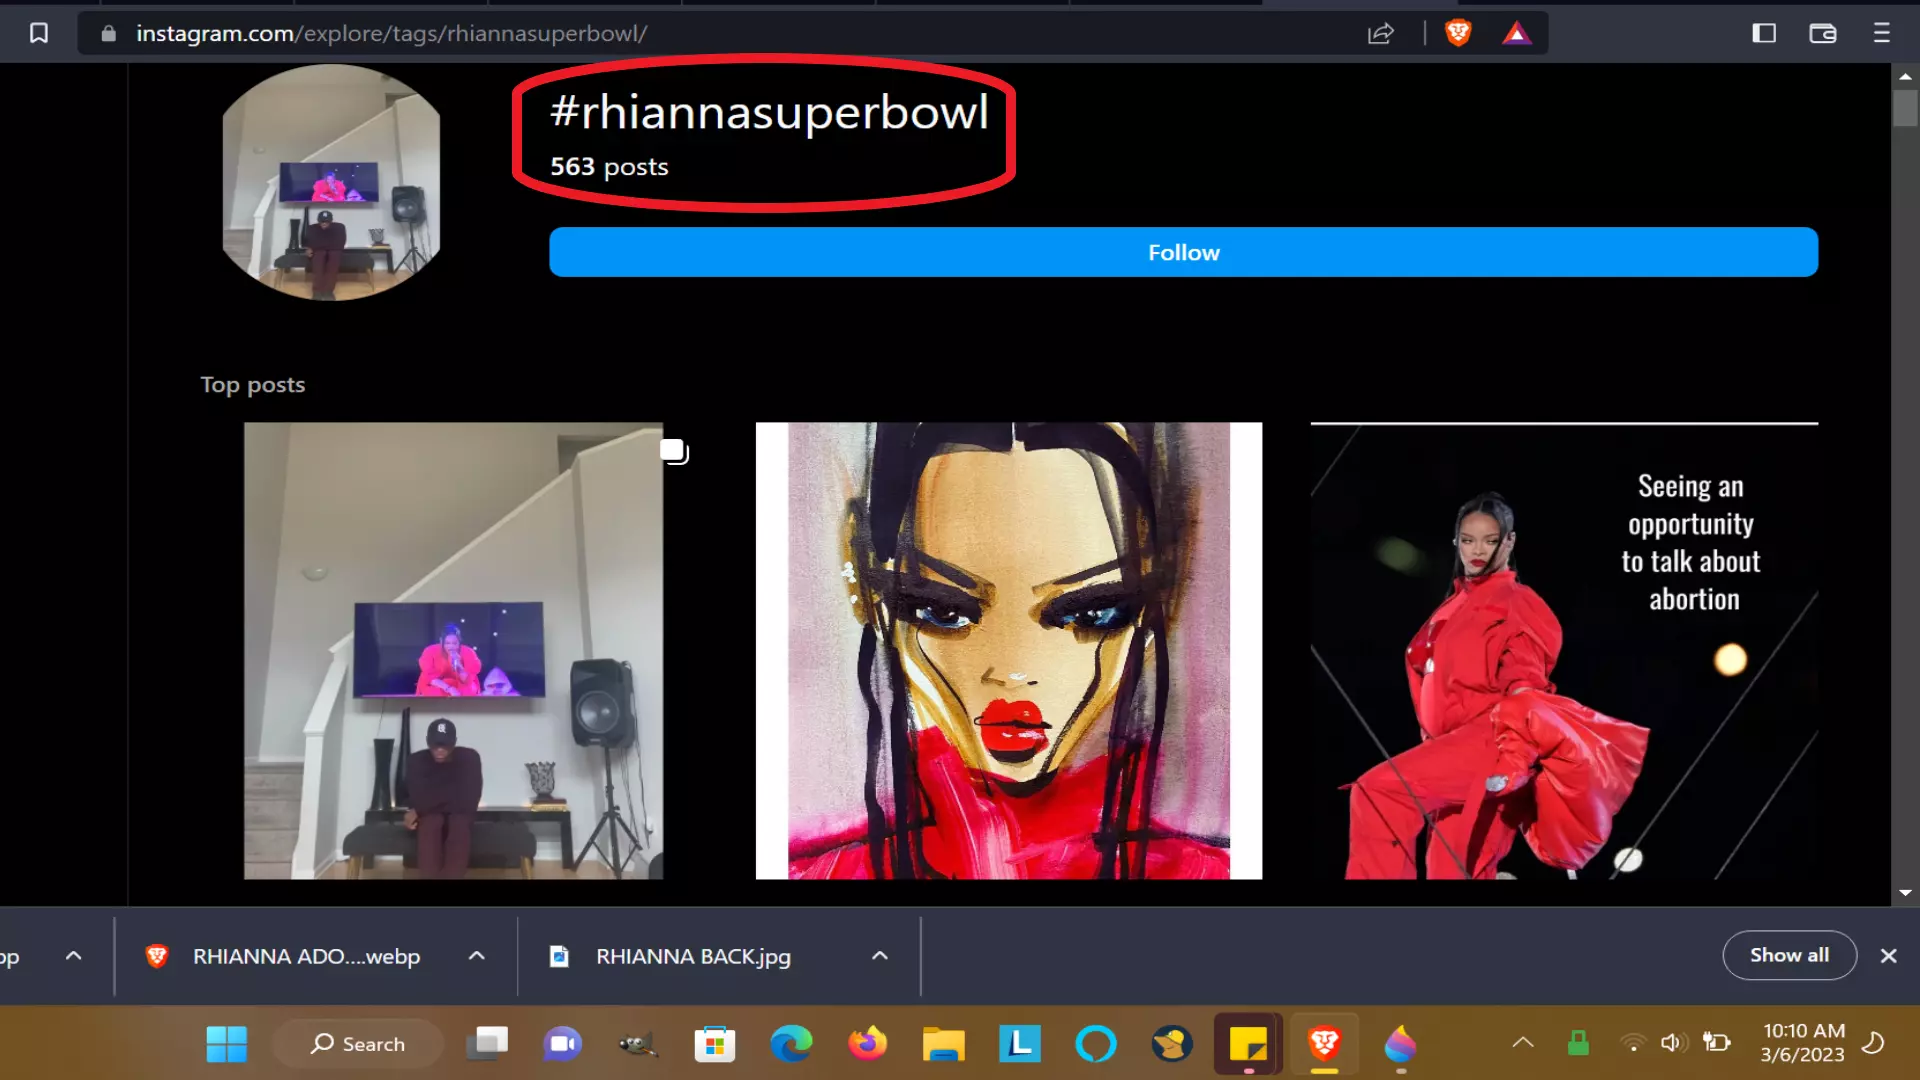 Instagram Image shows Rhianna spelled with RH at the beginning